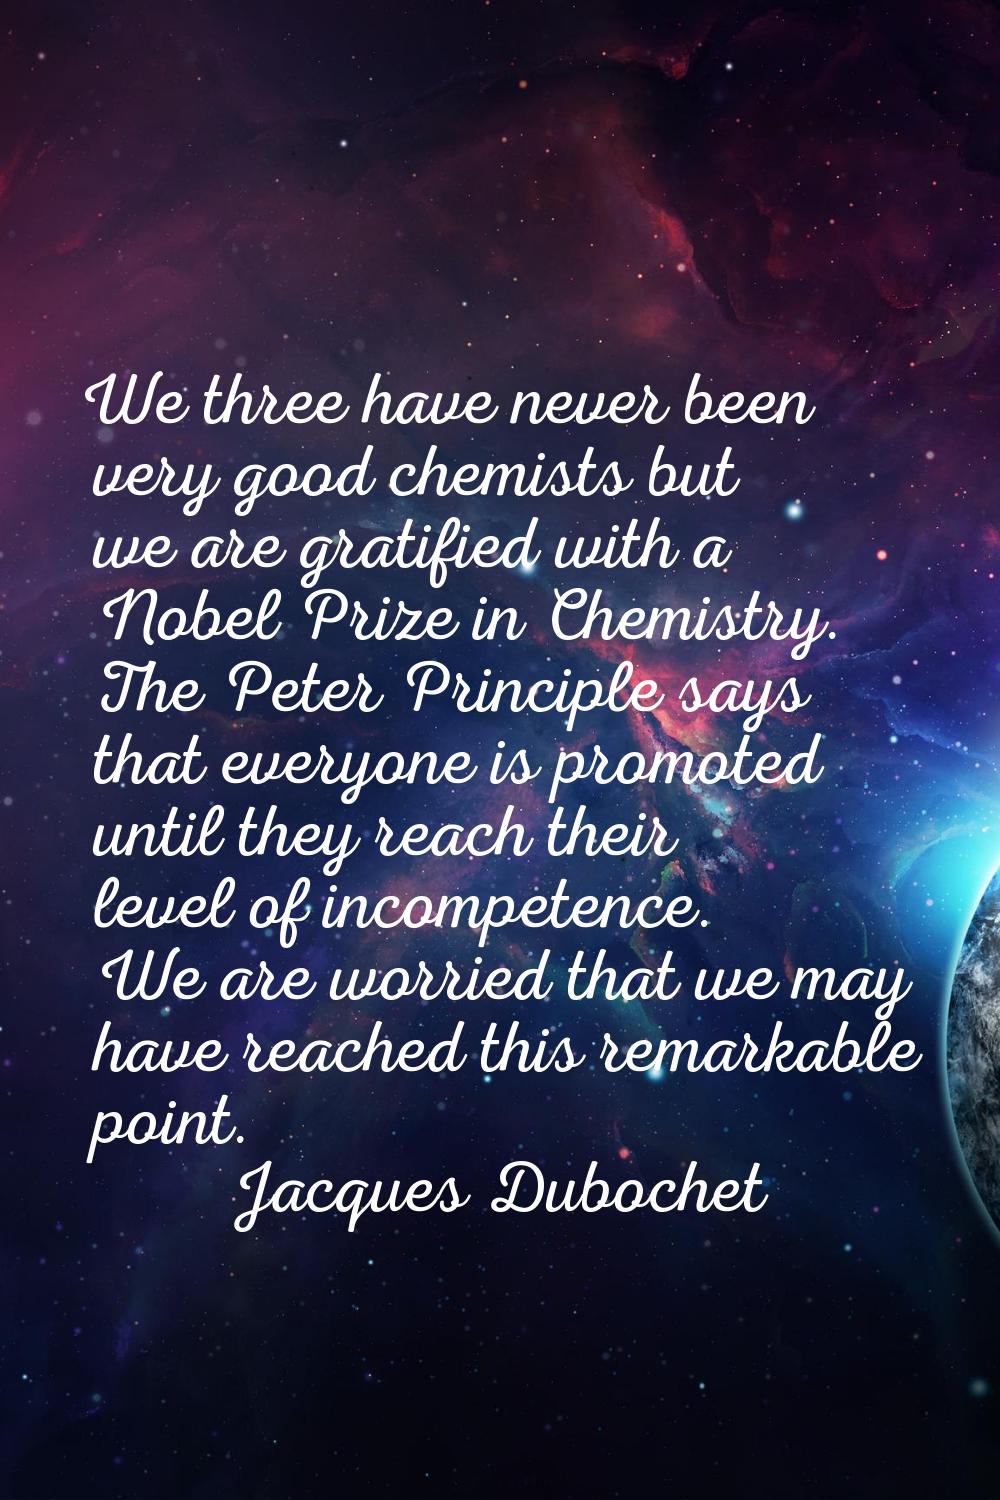 We three have never been very good chemists but we are gratified with a Nobel Prize in Chemistry. T